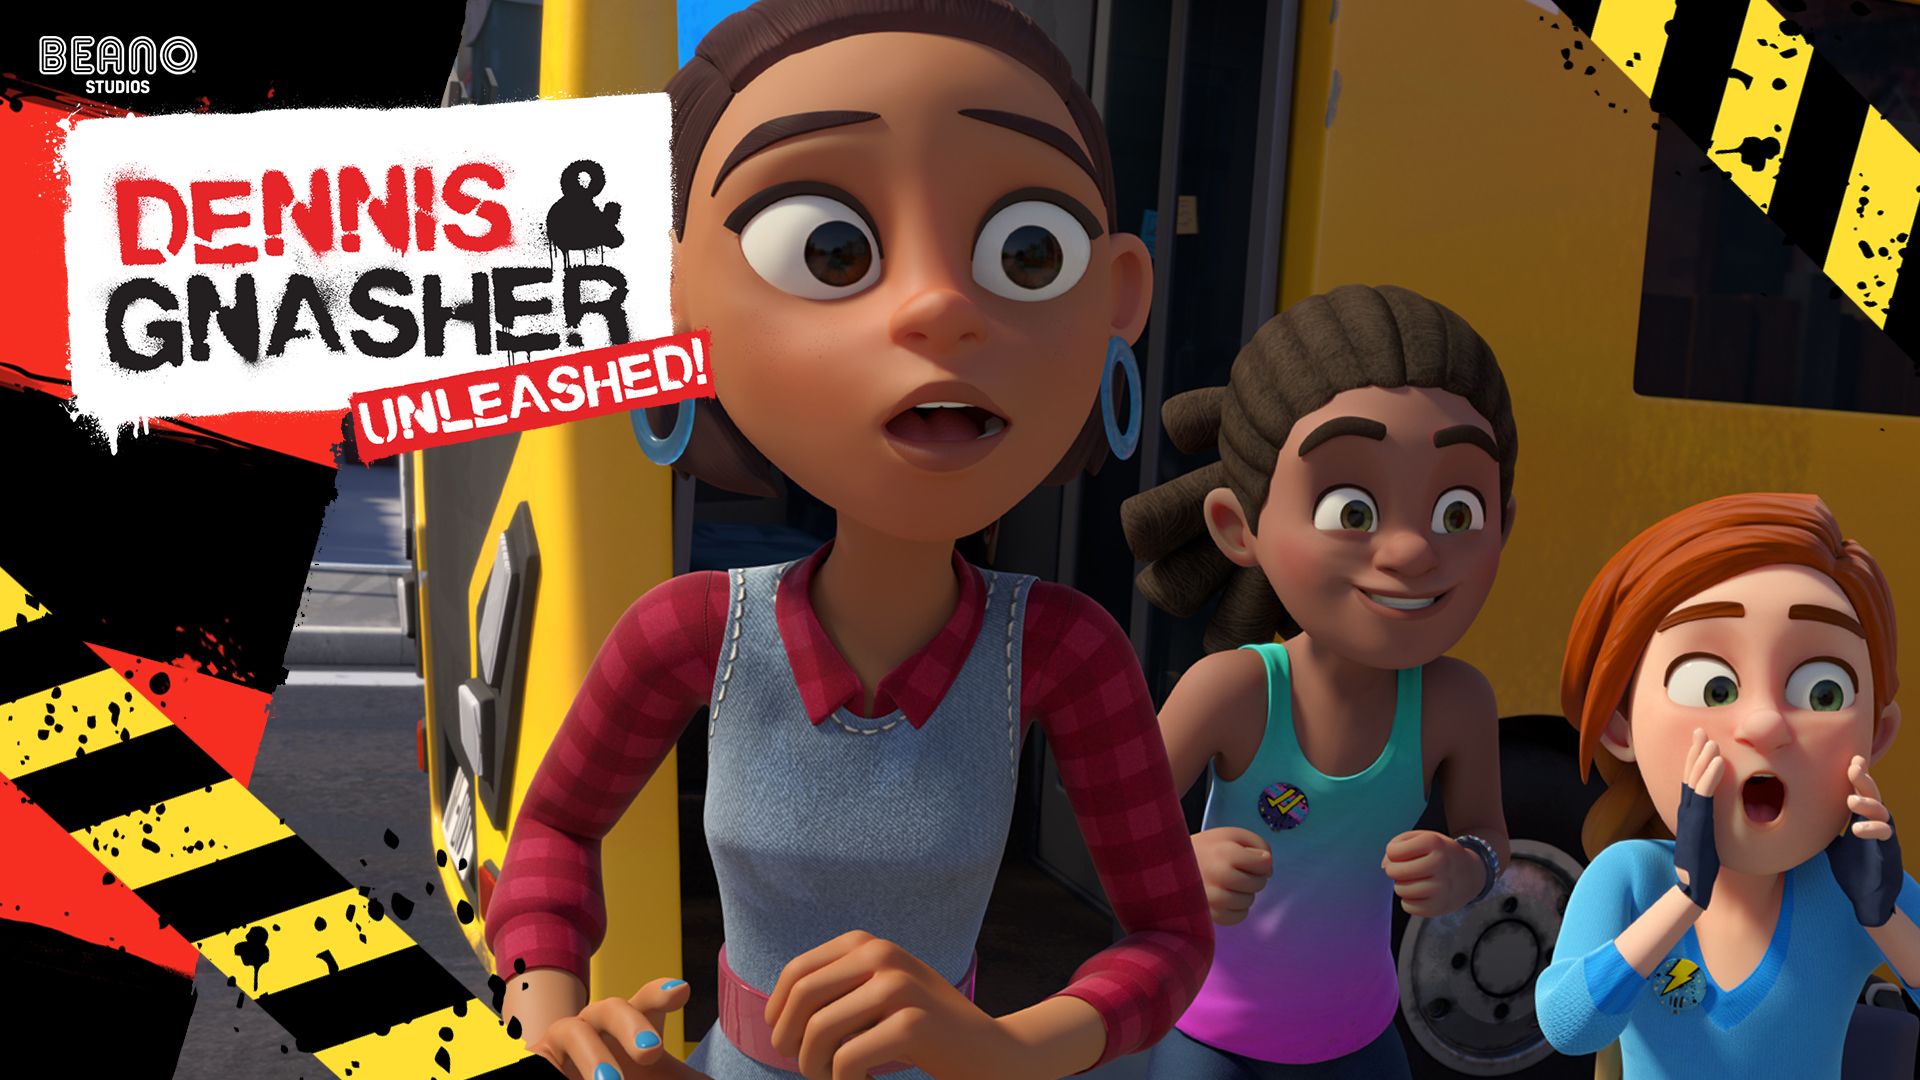 Dennis & Gnasher Unleashed! Series 2 - Episode 1: Beat the Bus